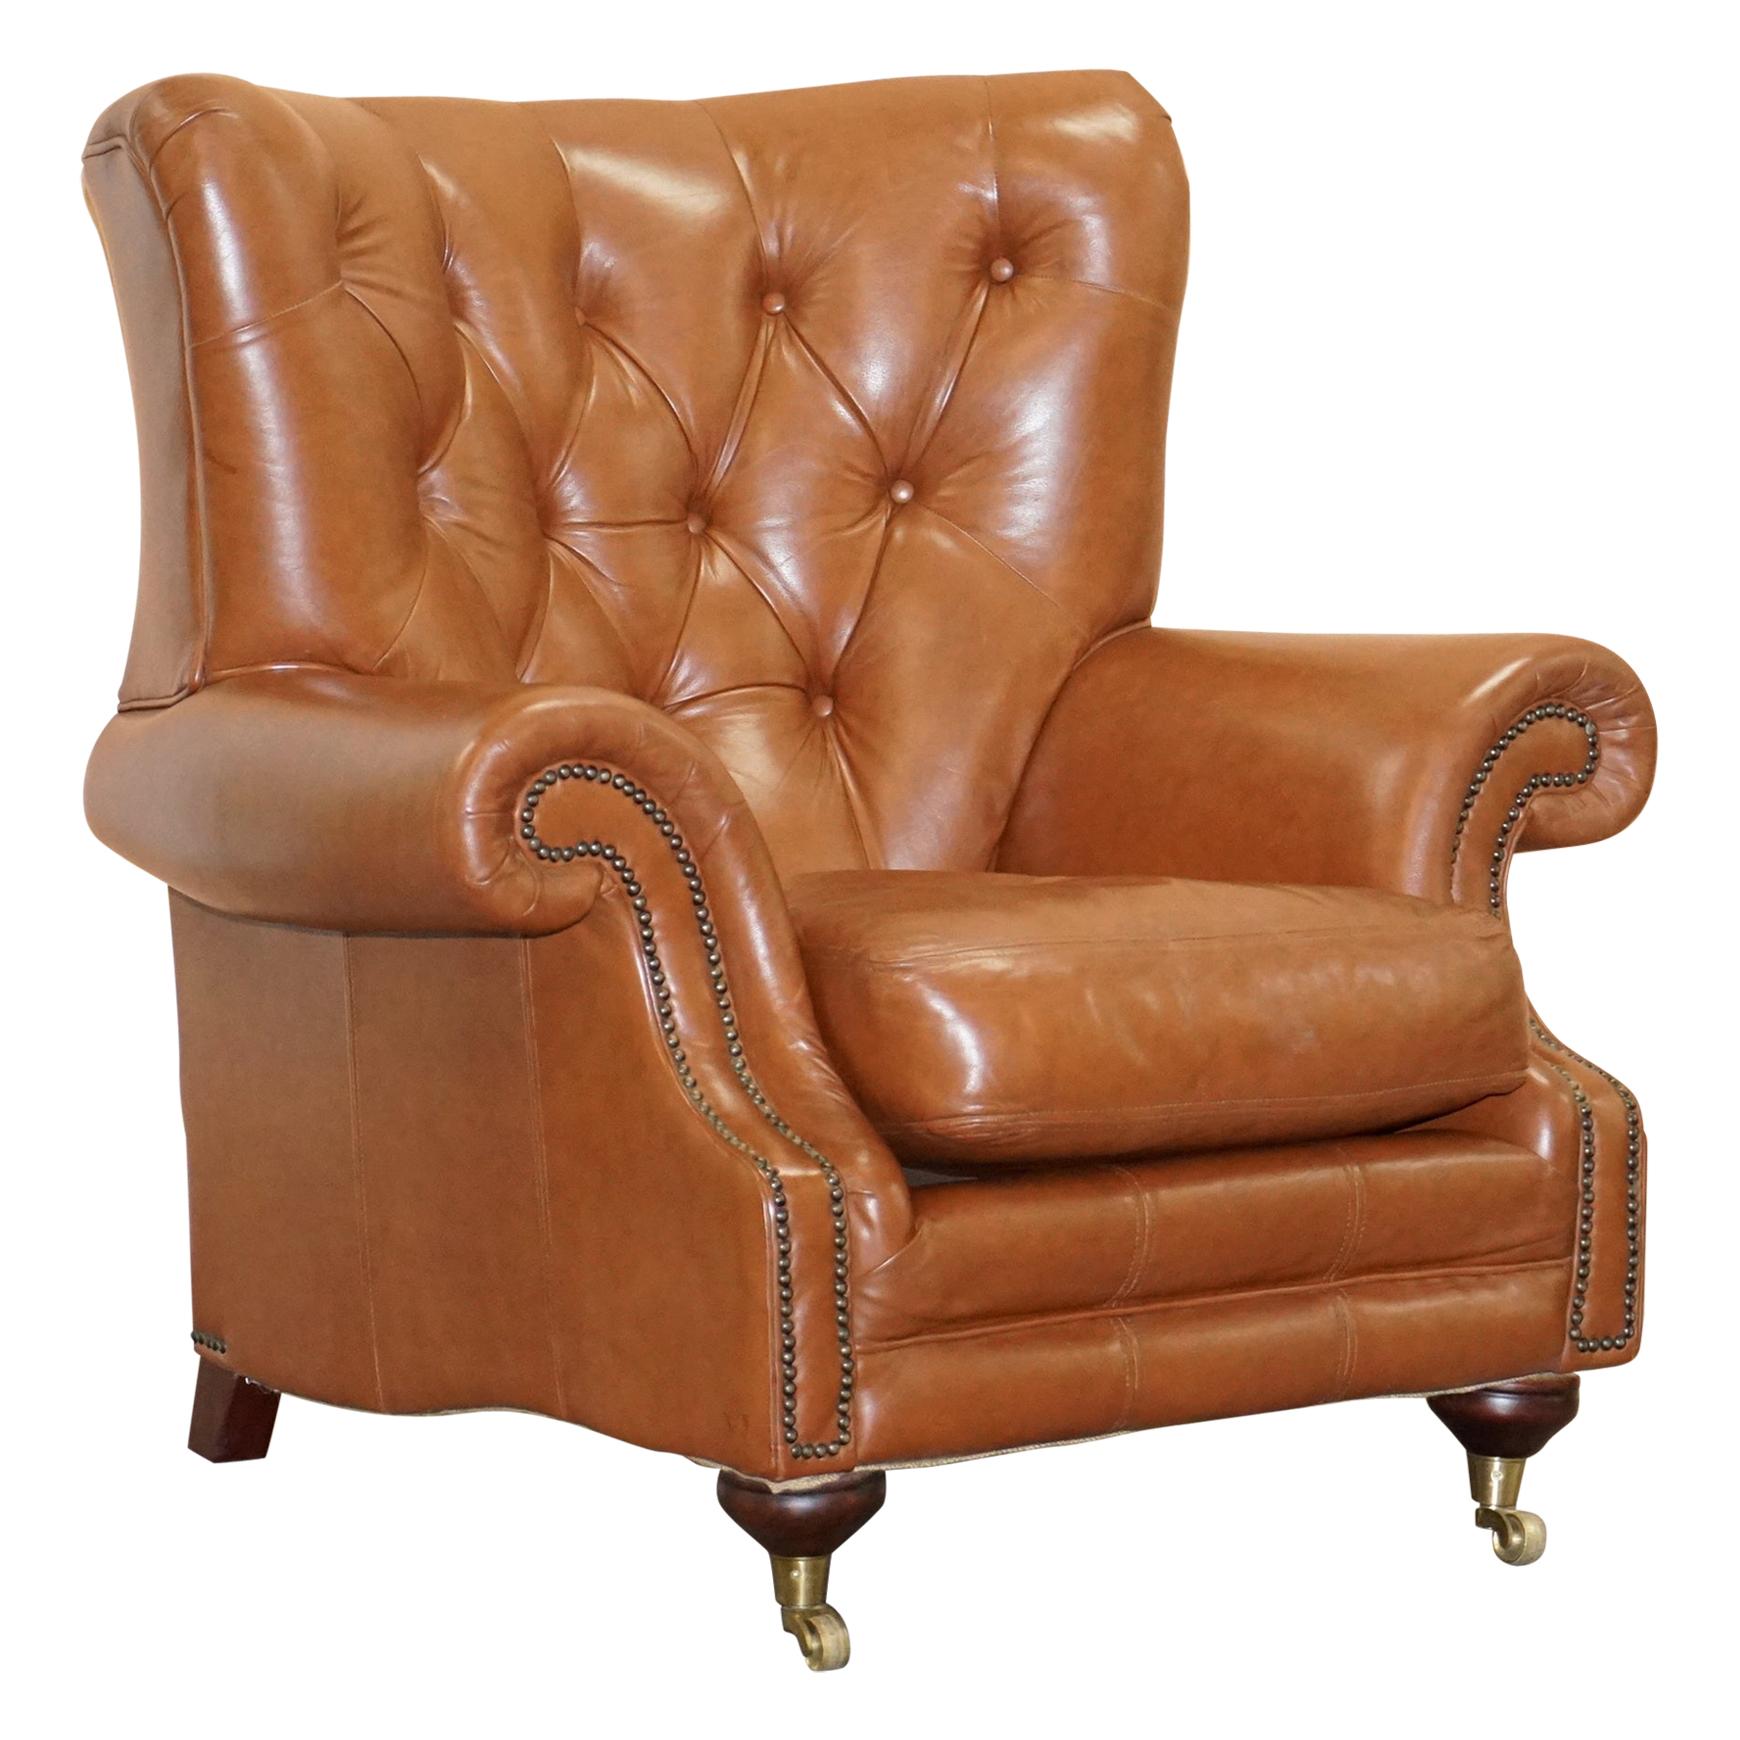 Medallion Upholstery Brown Leather Chesterfield Armchair Part of Suite